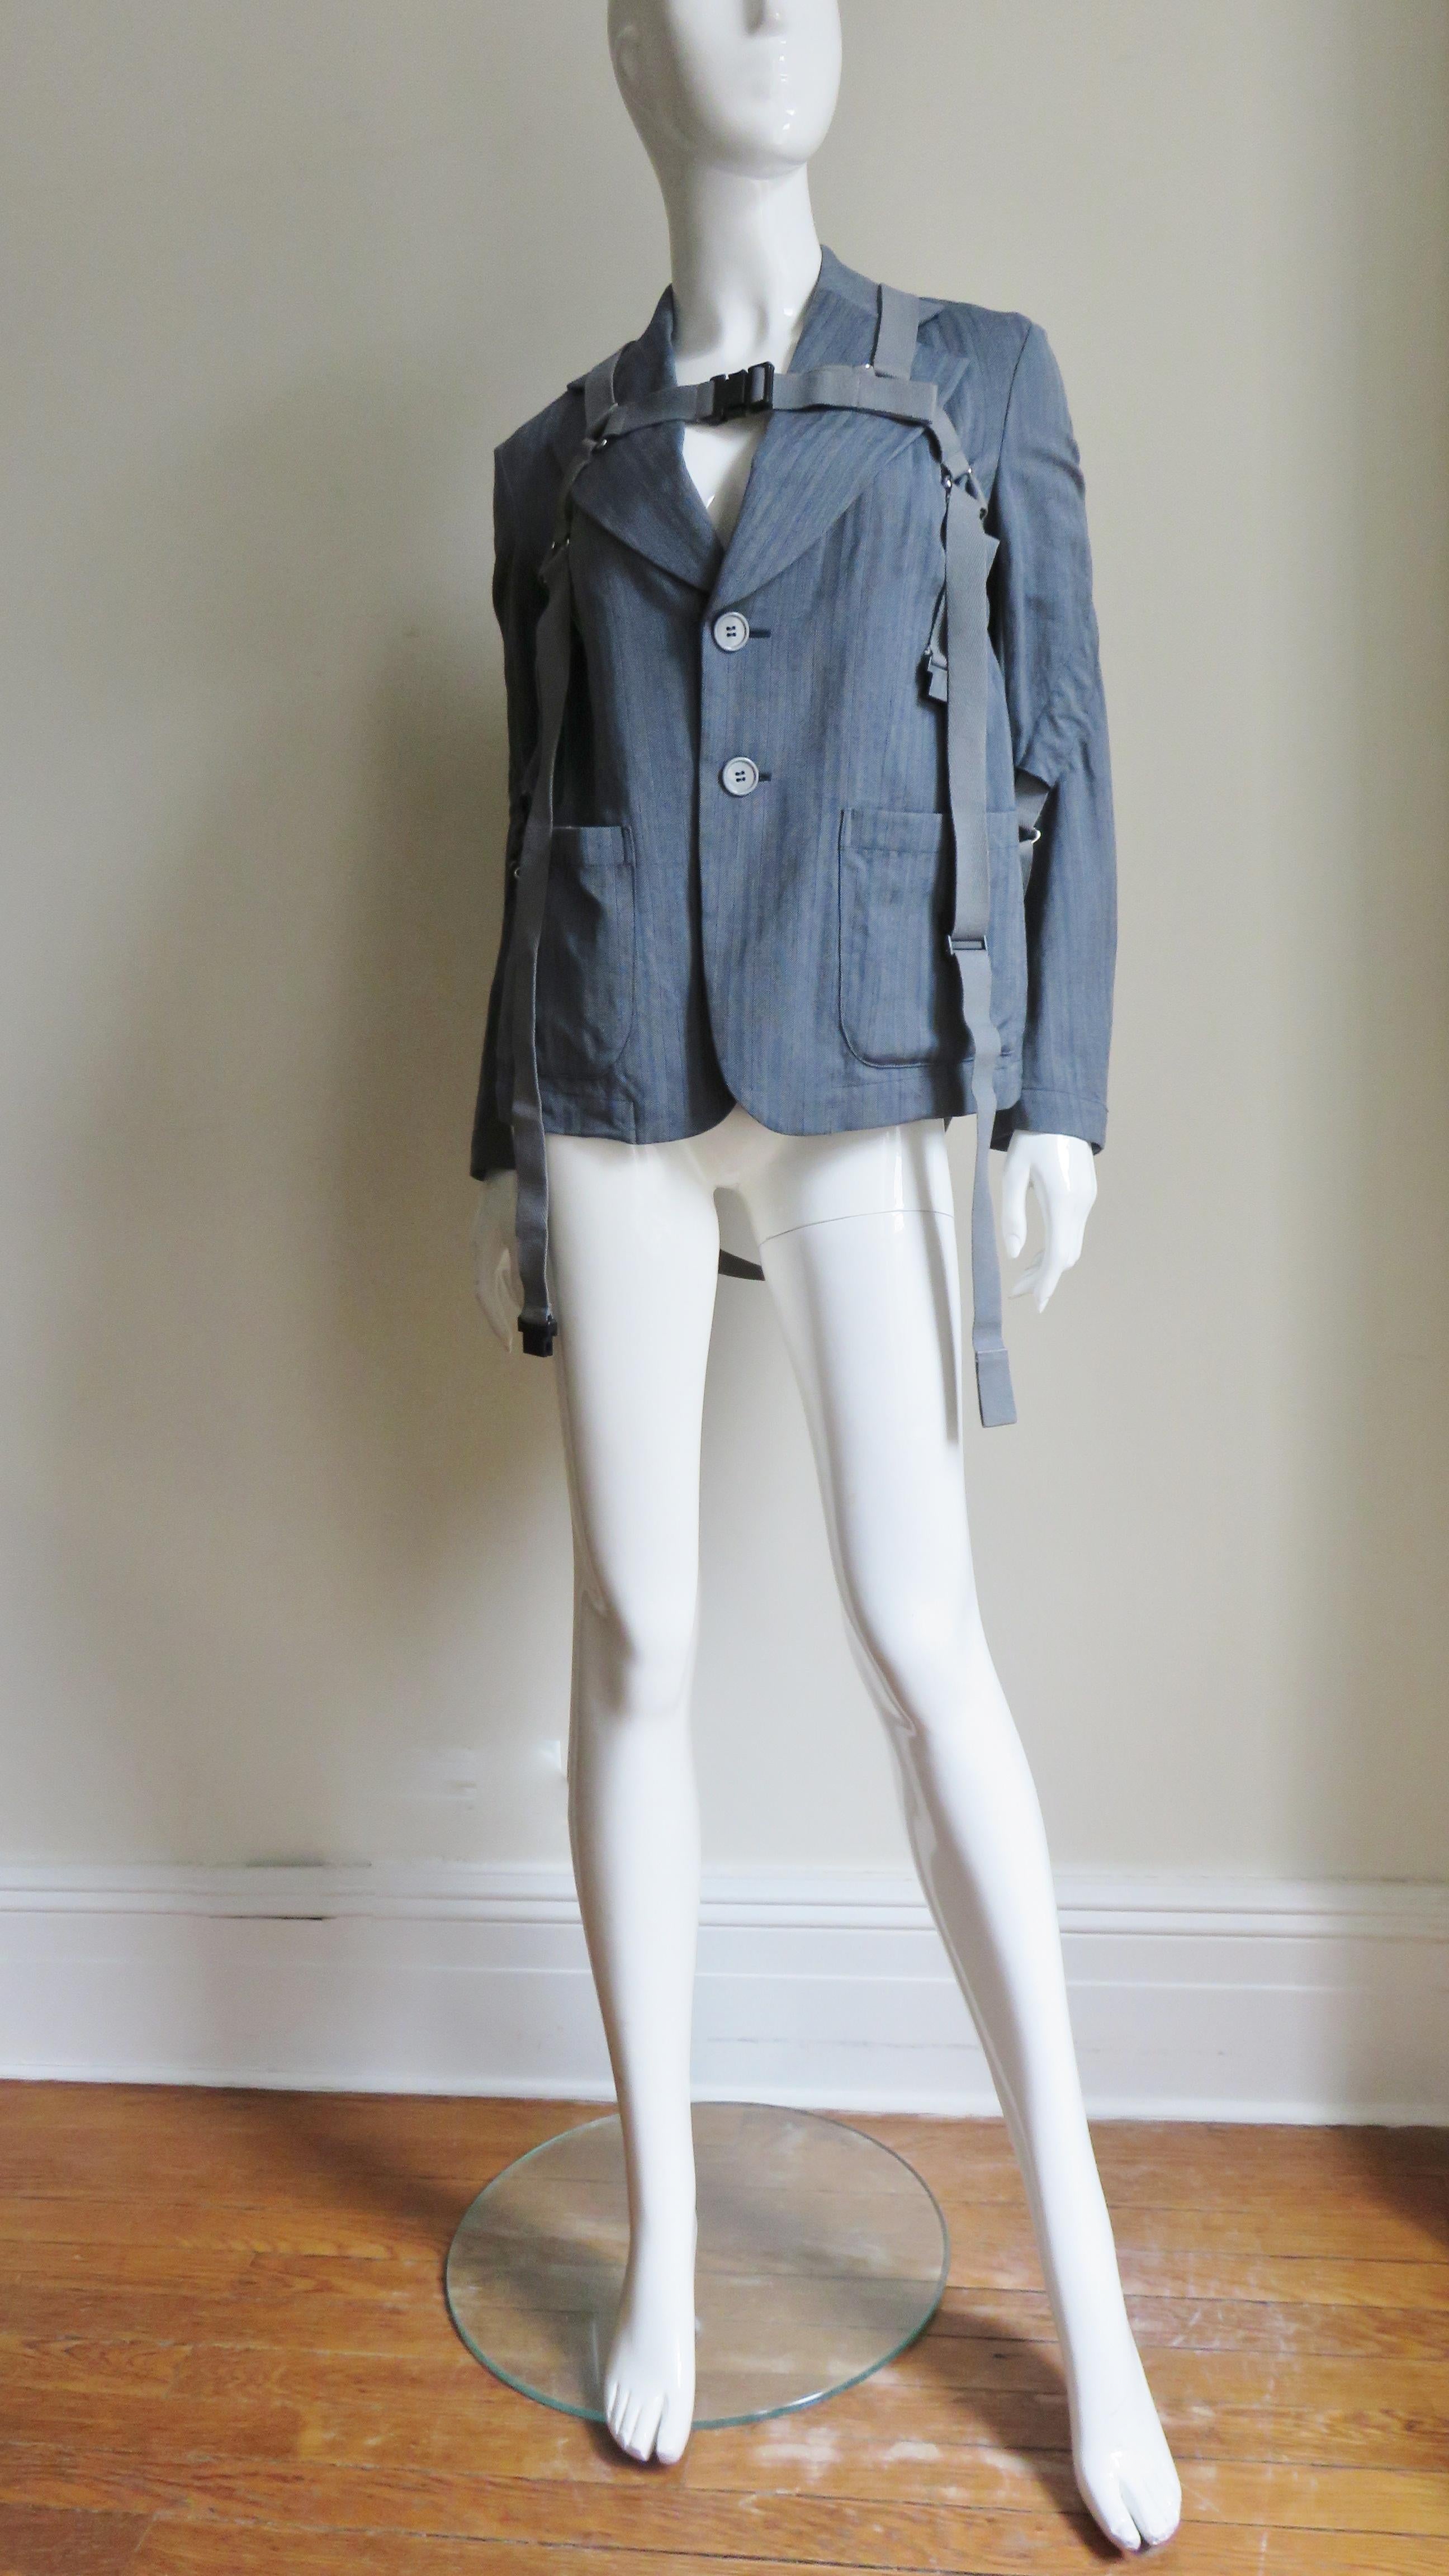 Comme des Garcons Jacket with Straps AD 2002 For Sale 2